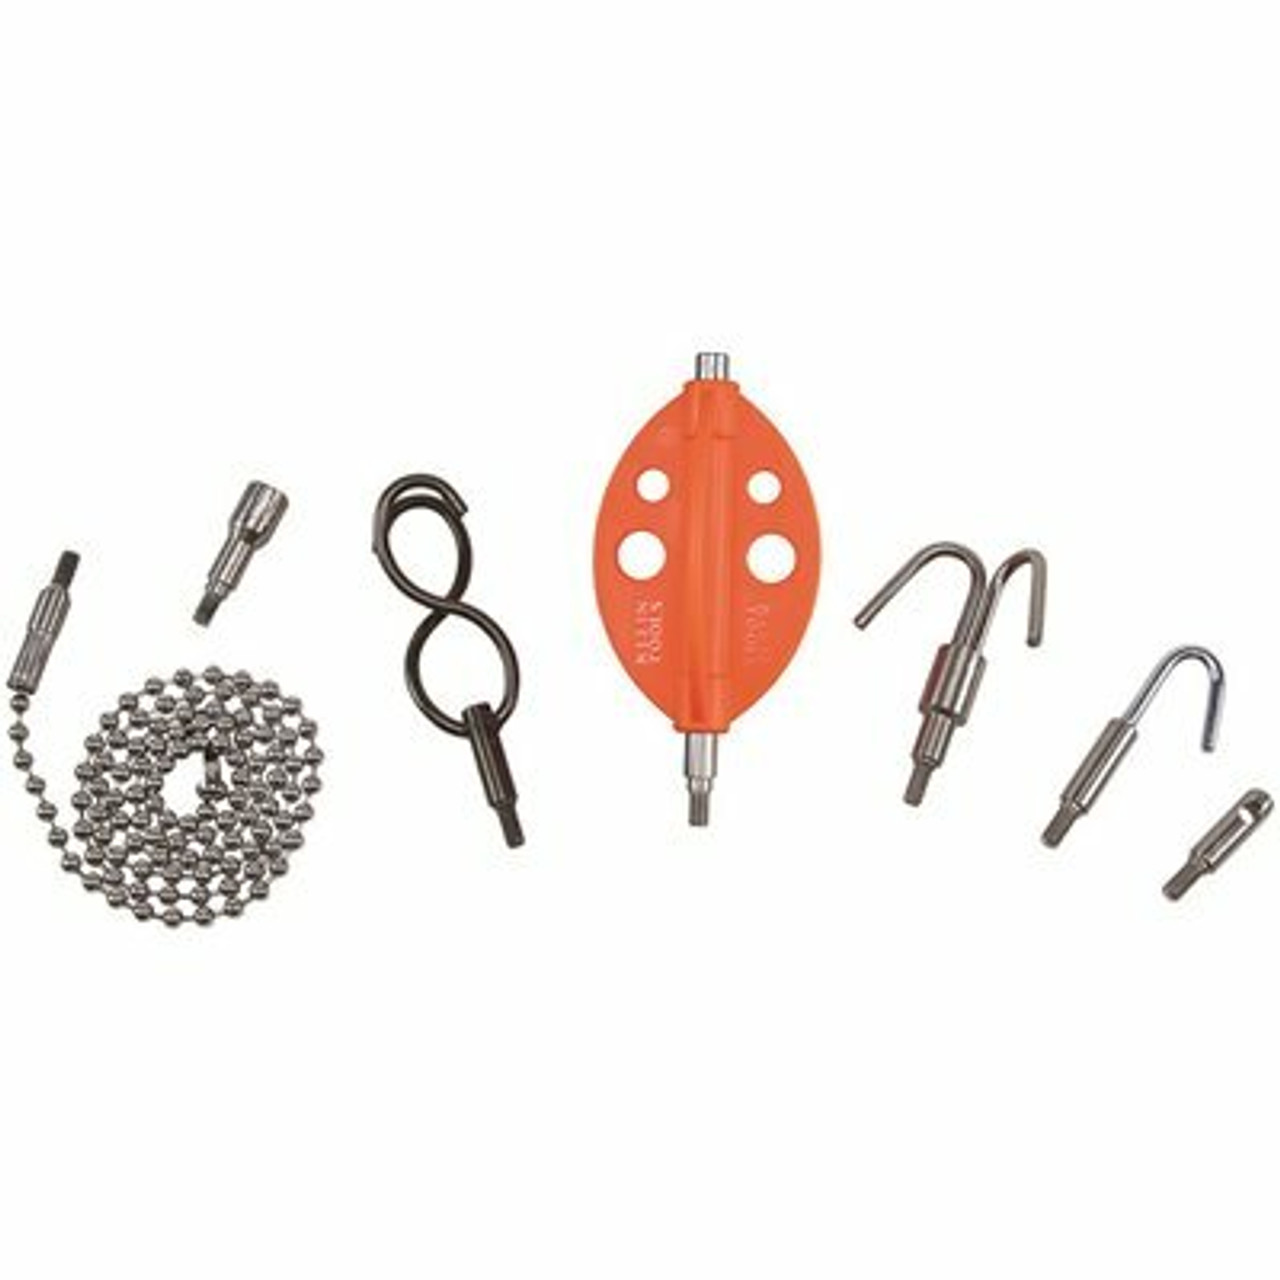 Klein Tools Attachment Set For Fish Rod (7-Piece)